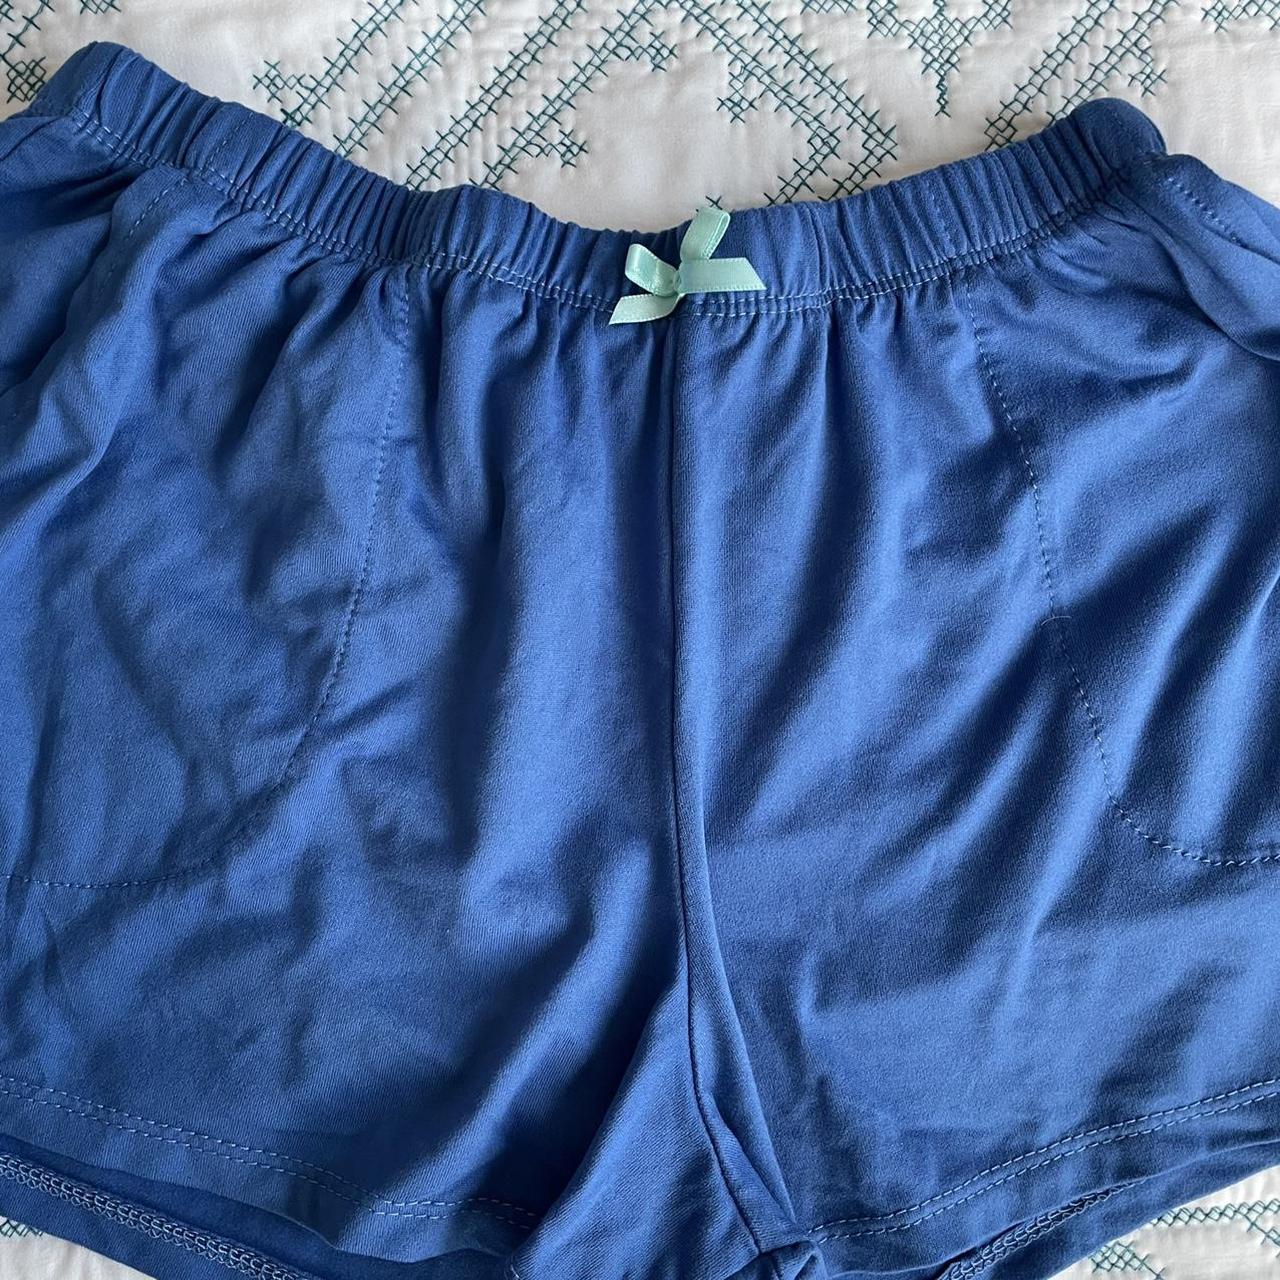 Product Image 2 - Blue pj shorts with pockets